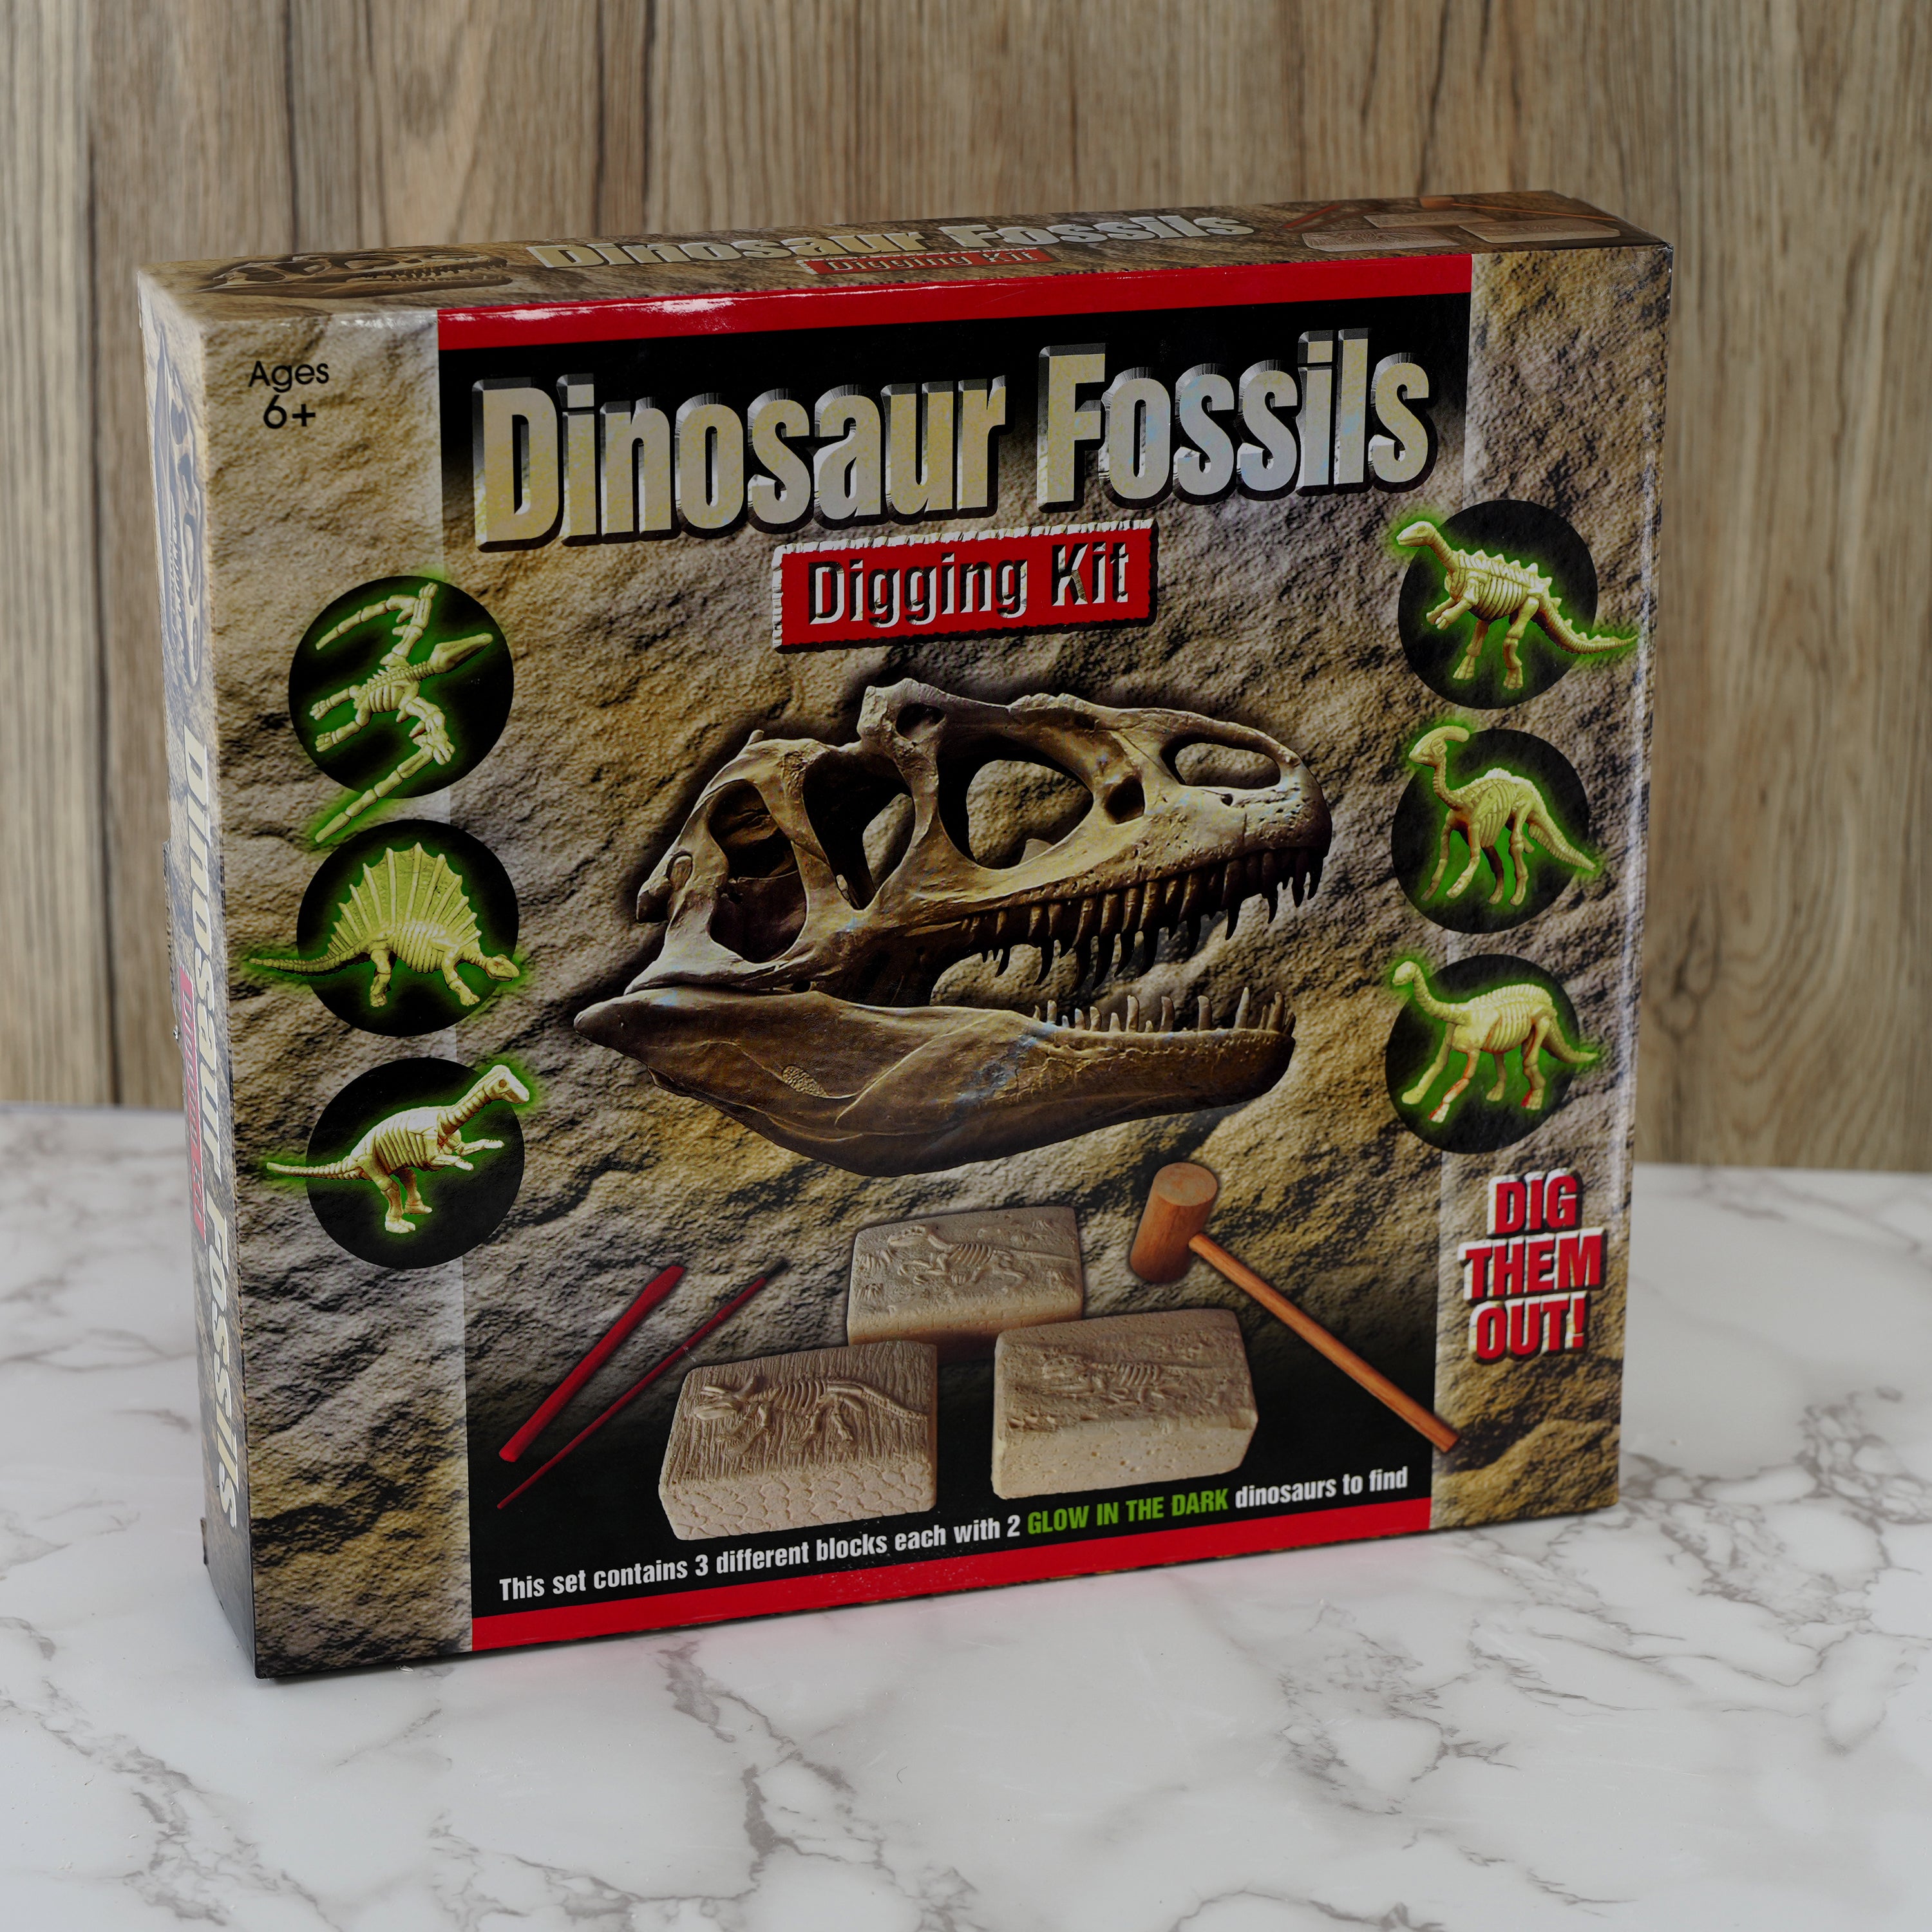 Dinosaur Fossils Digging Kit The Magic Toy Shop - The Magic Toy Shop